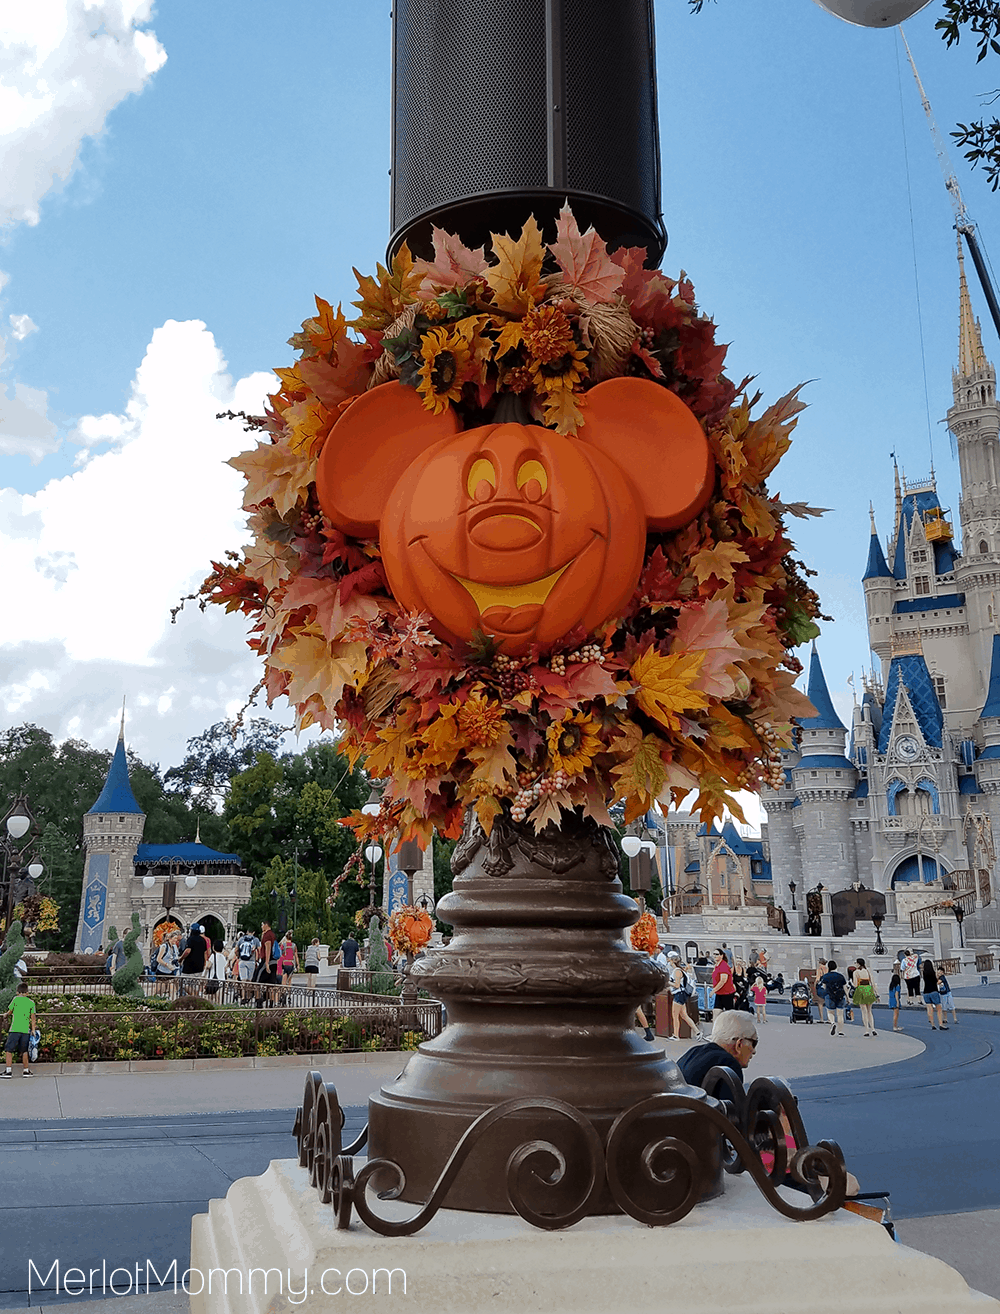 5 Tips for Mickey’s Not So Scary Halloween Party